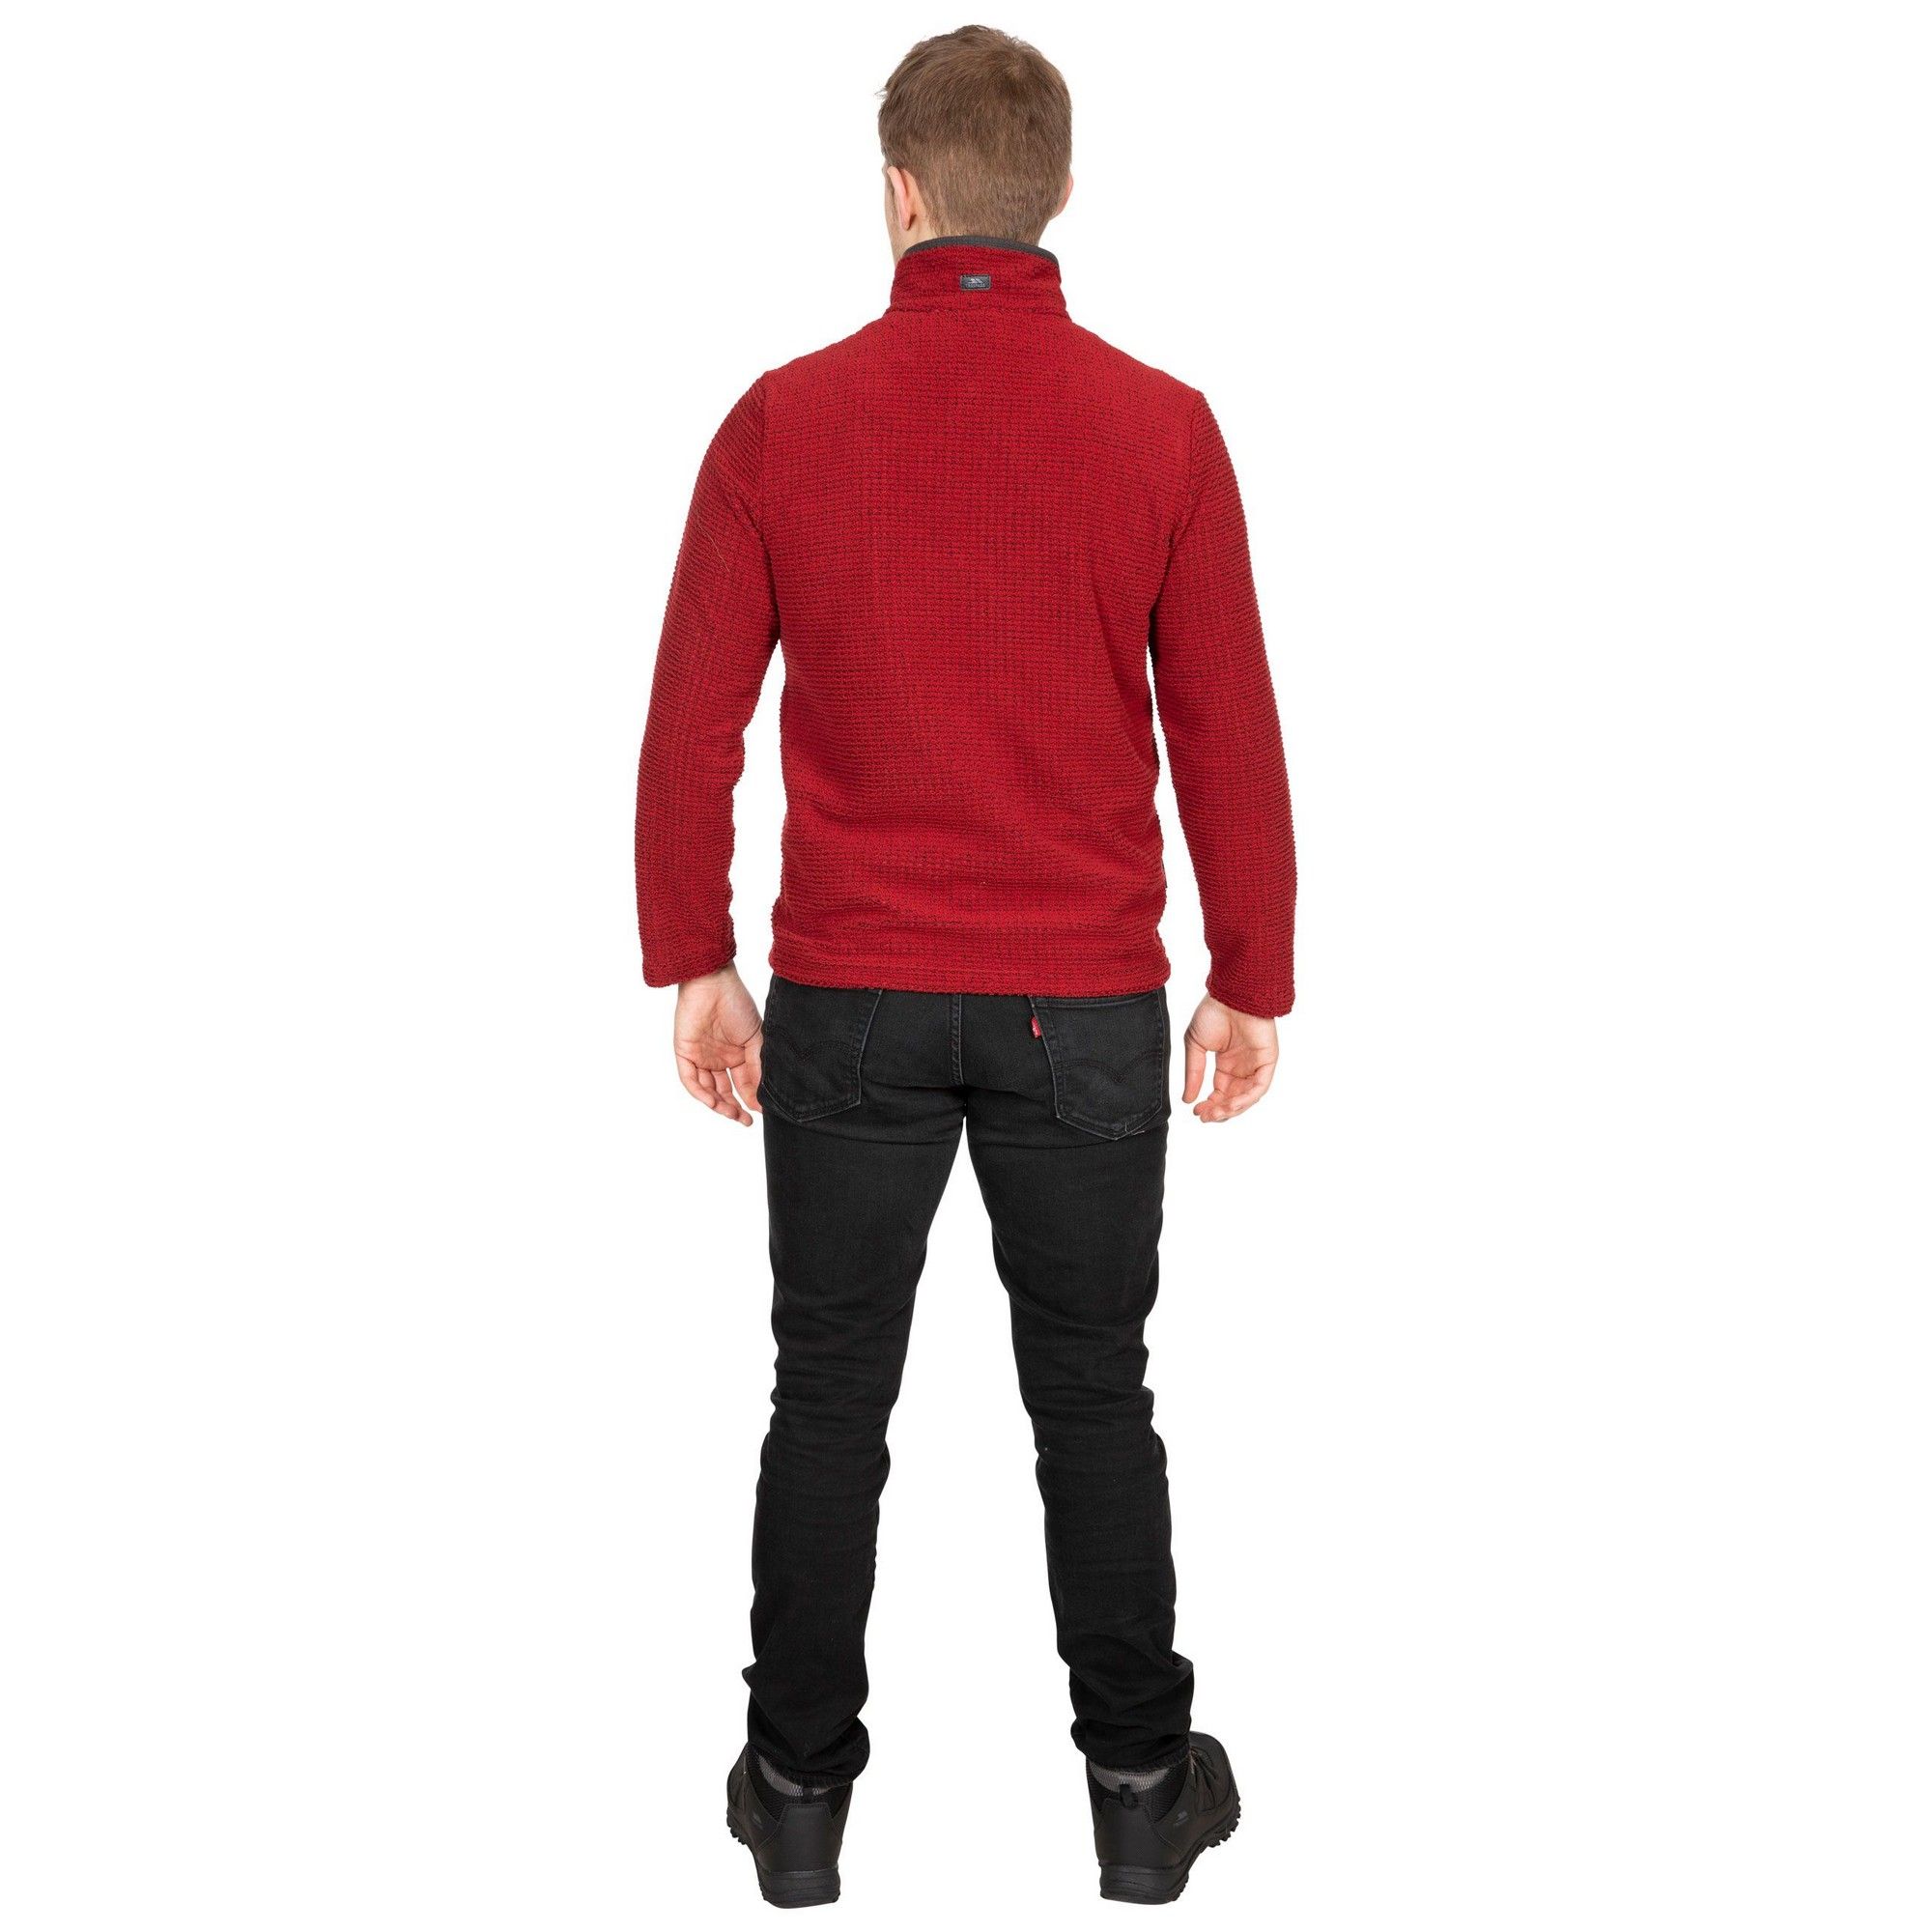 Shell: 100% Polyester fleece, Facings: 96% Polyester/4% Elastane. Textured fleece. 1/2 zip neck. Chin guard. Airtrap. 220gsm. Trespass Mens Chest Sizing (approx): S - 35-37in/89-94cm, M - 38-40in/96.5-101.5cm, L - 41-43in/104-109cm, XL - 44-46in/111.5-117cm, XXL - 46-48in/117-122cm, 3XL - 48-50in/122-127cm.